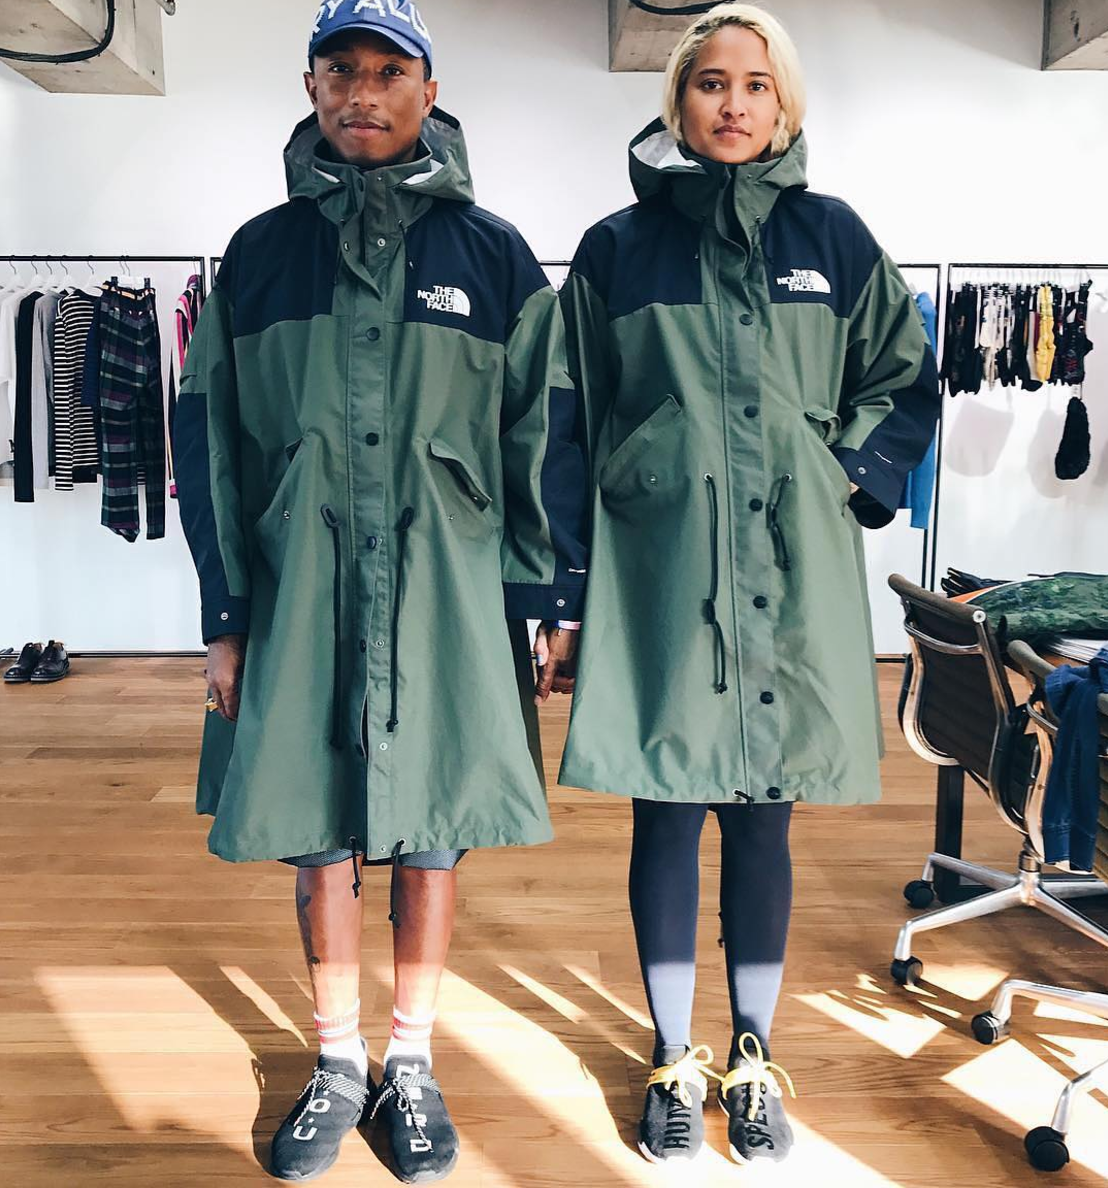 SPOTTED: Pharrell Williams And Helen Lasichanh In Sacai x The North Face Parka And Williams x adidas NMD Human Race Sneakers – PAUSE Online Fashion, Street Style, Fashion News